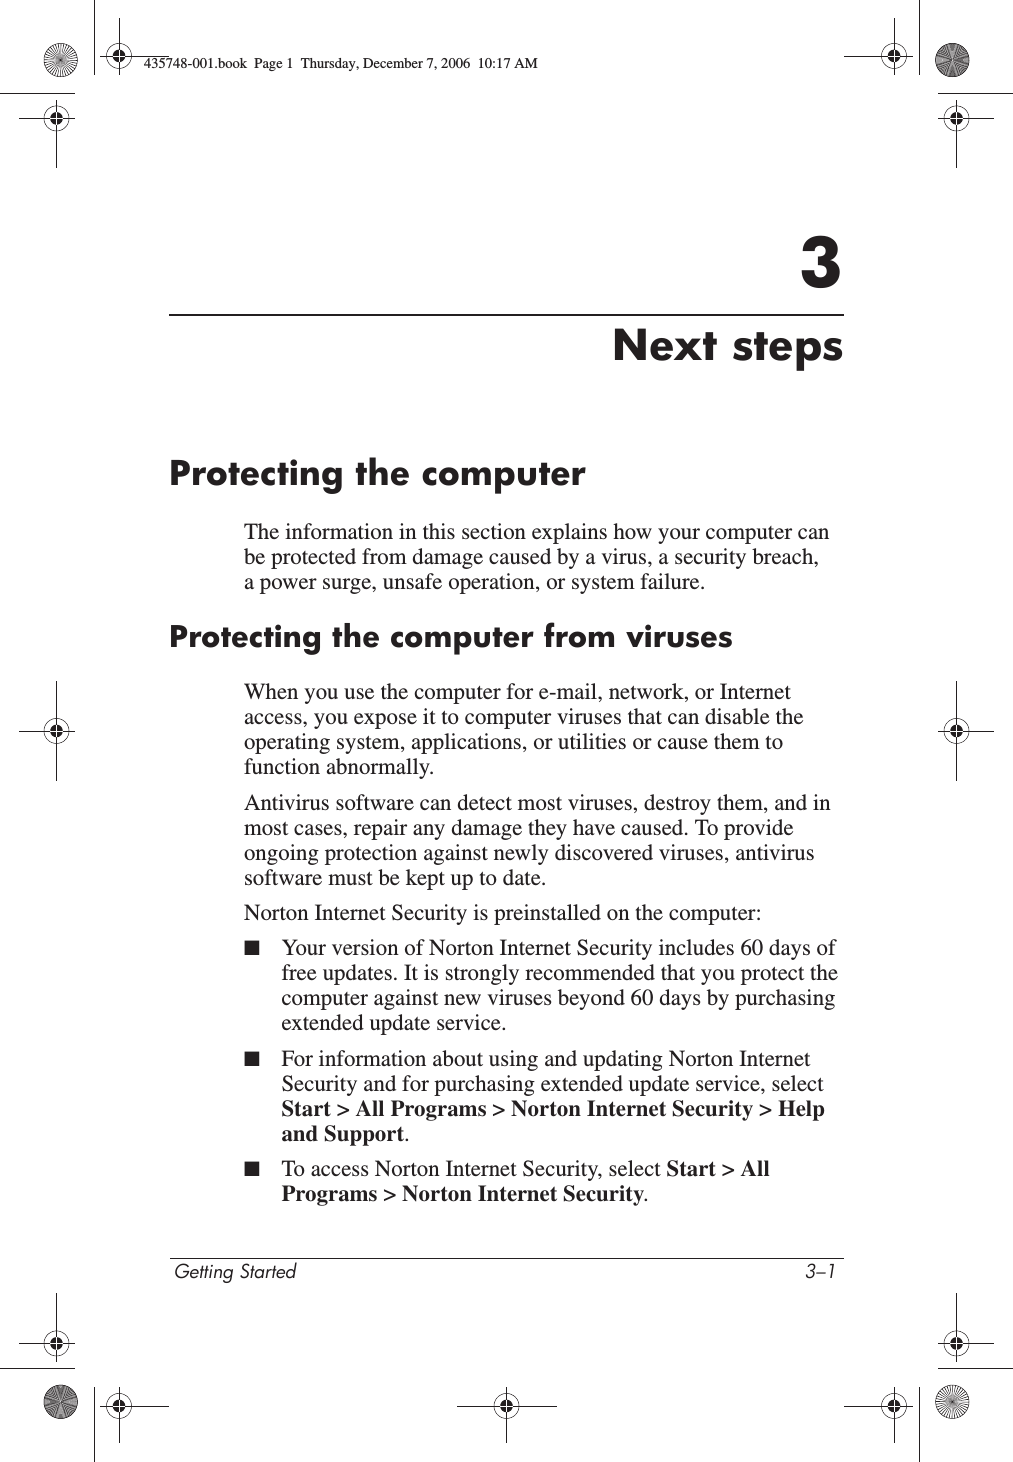 Getting Started 3–13Next stepsProtecting the computerThe information in this section explains how your computer can be protected from damage caused by a virus, a security breach, a power surge, unsafe operation, or system failure.Protecting the computer from virusesWhen you use the computer for e-mail, network, or Internet access, you expose it to computer viruses that can disable the operating system, applications, or utilities or cause them to function abnormally. Antivirus software can detect most viruses, destroy them, and in most cases, repair any damage they have caused. To provide ongoing protection against newly discovered viruses, antivirus software must be kept up to date.Norton Internet Security is preinstalled on the computer:■Your version of Norton Internet Security includes 60 days of free updates. It is strongly recommended that you protect the computer against new viruses beyond 60 days by purchasing extended update service.■For information about using and updating Norton Internet Security and for purchasing extended update service, select Start &gt; All Programs &gt; Norton Internet Security &gt; Help and Support.■To access Norton Internet Security, select Start &gt; All Programs &gt; Norton Internet Security.435748-001.book  Page 1  Thursday, December 7, 2006  10:17 AM